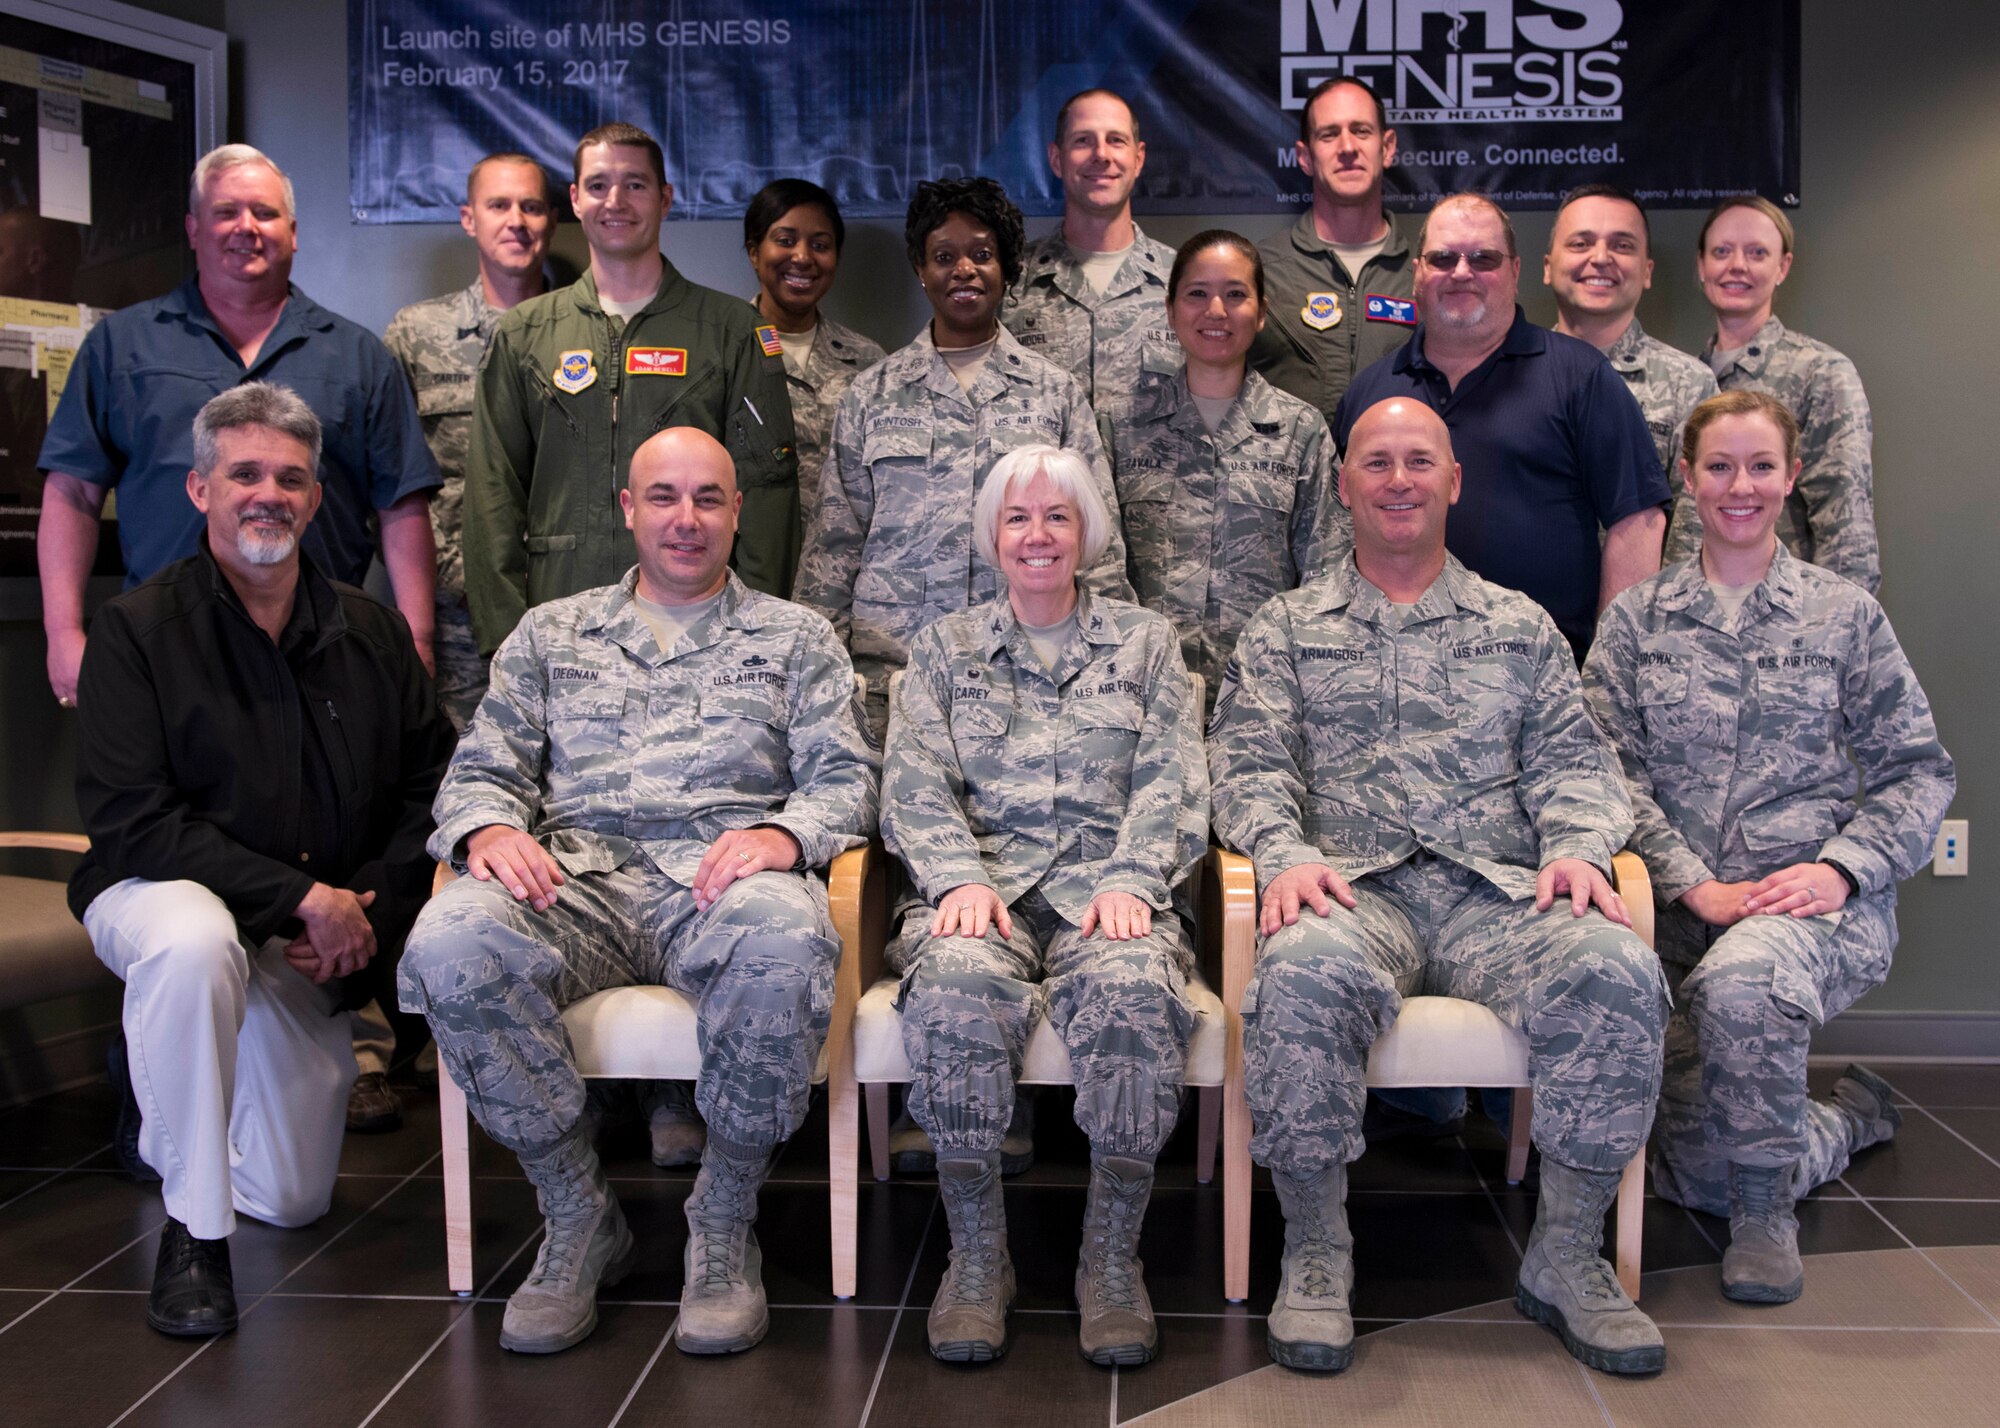 Col. Meg Carey (center), 92nd Medical Group commander, poses for a group photo with the MDG command staff and unit leaders May 17, 2017, at Fairchild Air Force Base, Washington. Col. Carey commands a group, supported by 3 squadrons, delivering patient-centered healthcare services in support of over 38,000 beneficiaries. 
(U.S. Air Force Photo / Airman 1st Class Ryan Lackey)